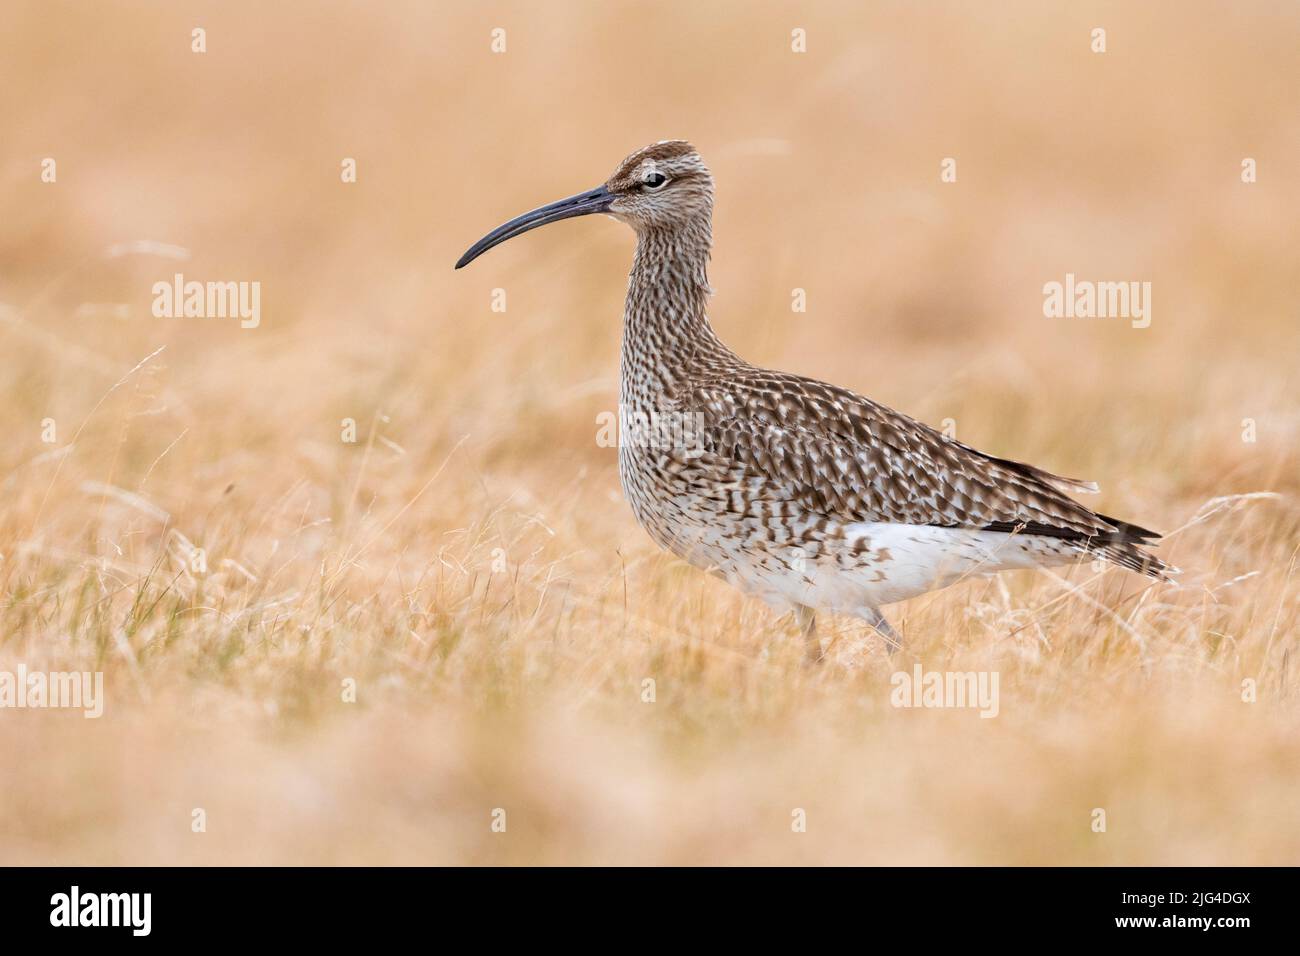 Eurasian Whimbrel (Numenius phaeopus), side view of an adult standing on the ground, Western Region, Iceland Stock Photo